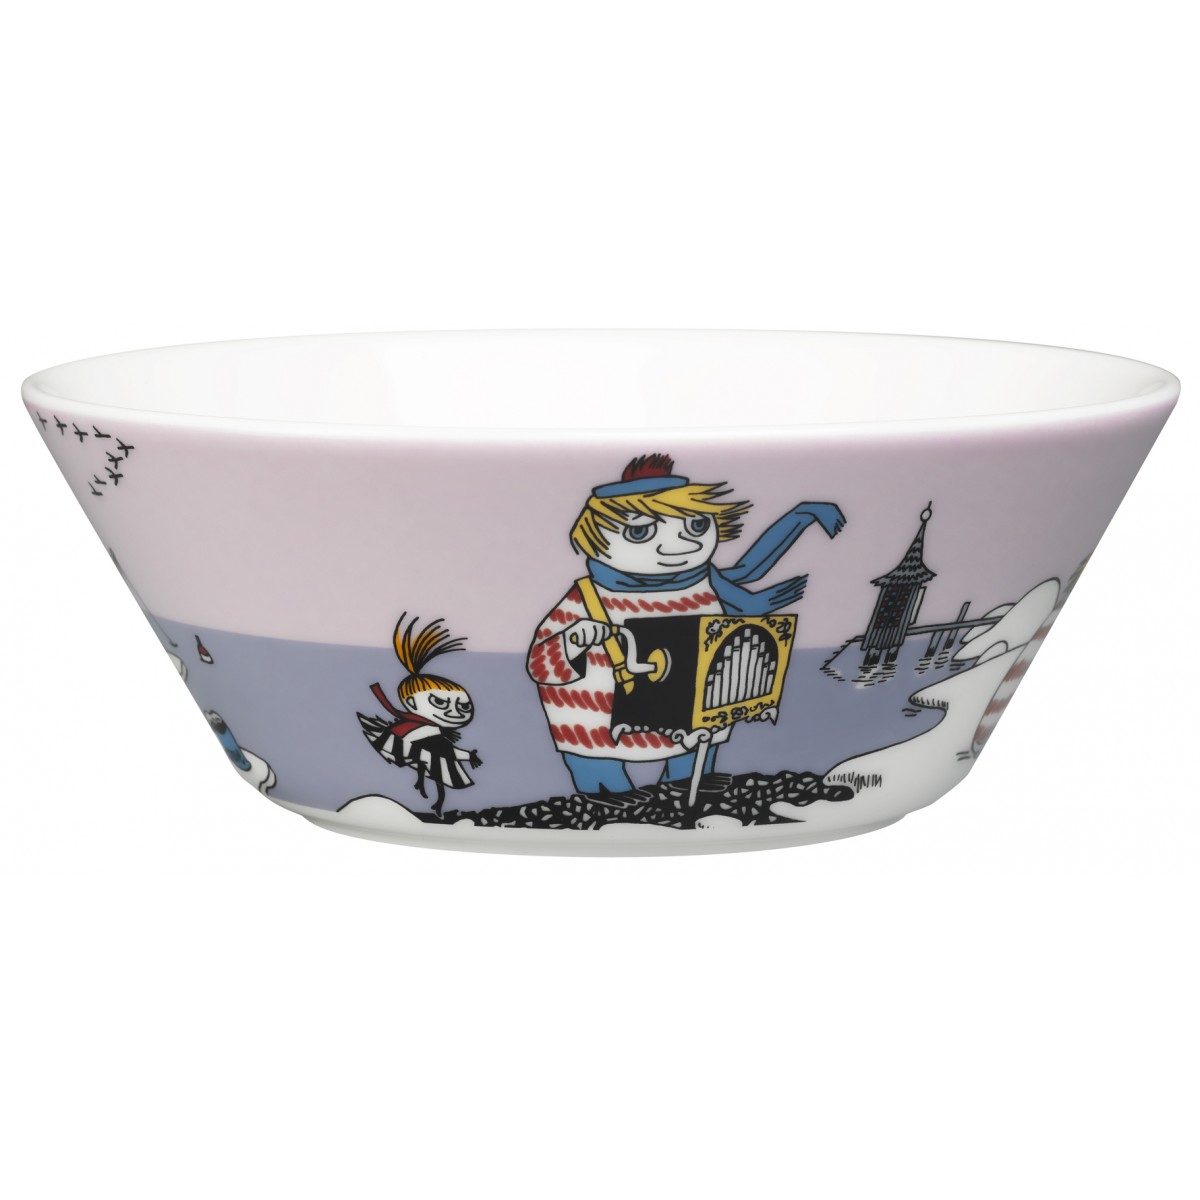 Tooticky violet - Moomin bowl